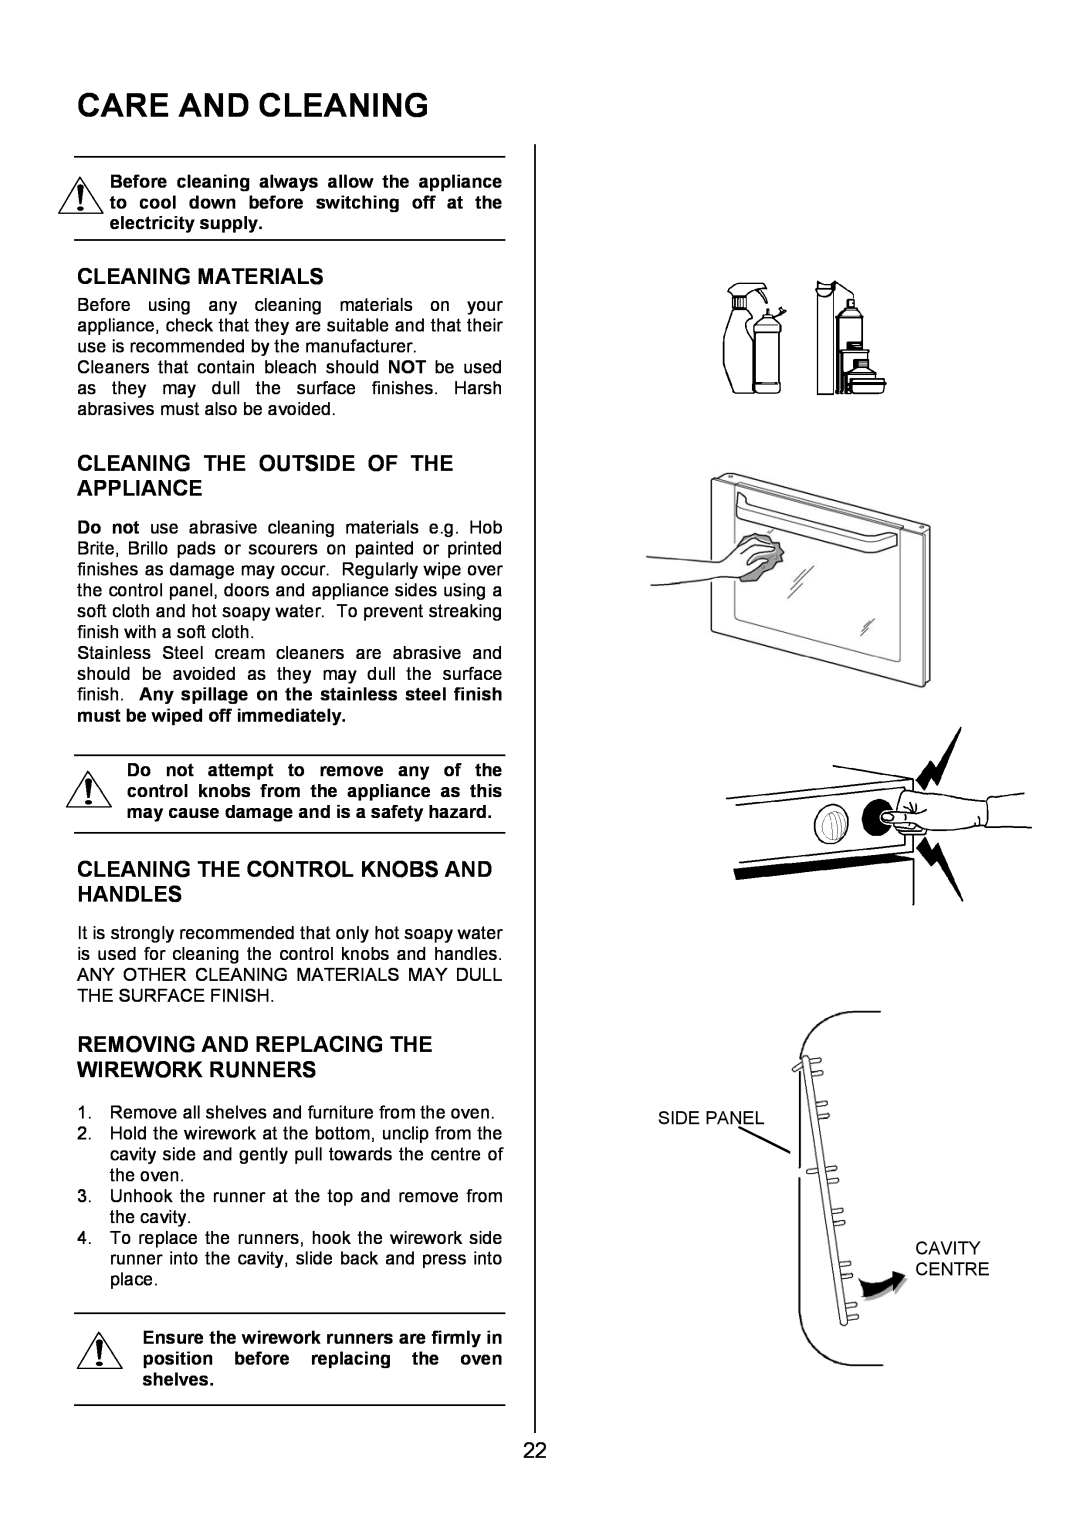 Electrolux EKG6049 user manual Care And Cleaning, Cleaning Materials, Cleaning The Outside Of The Appliance 